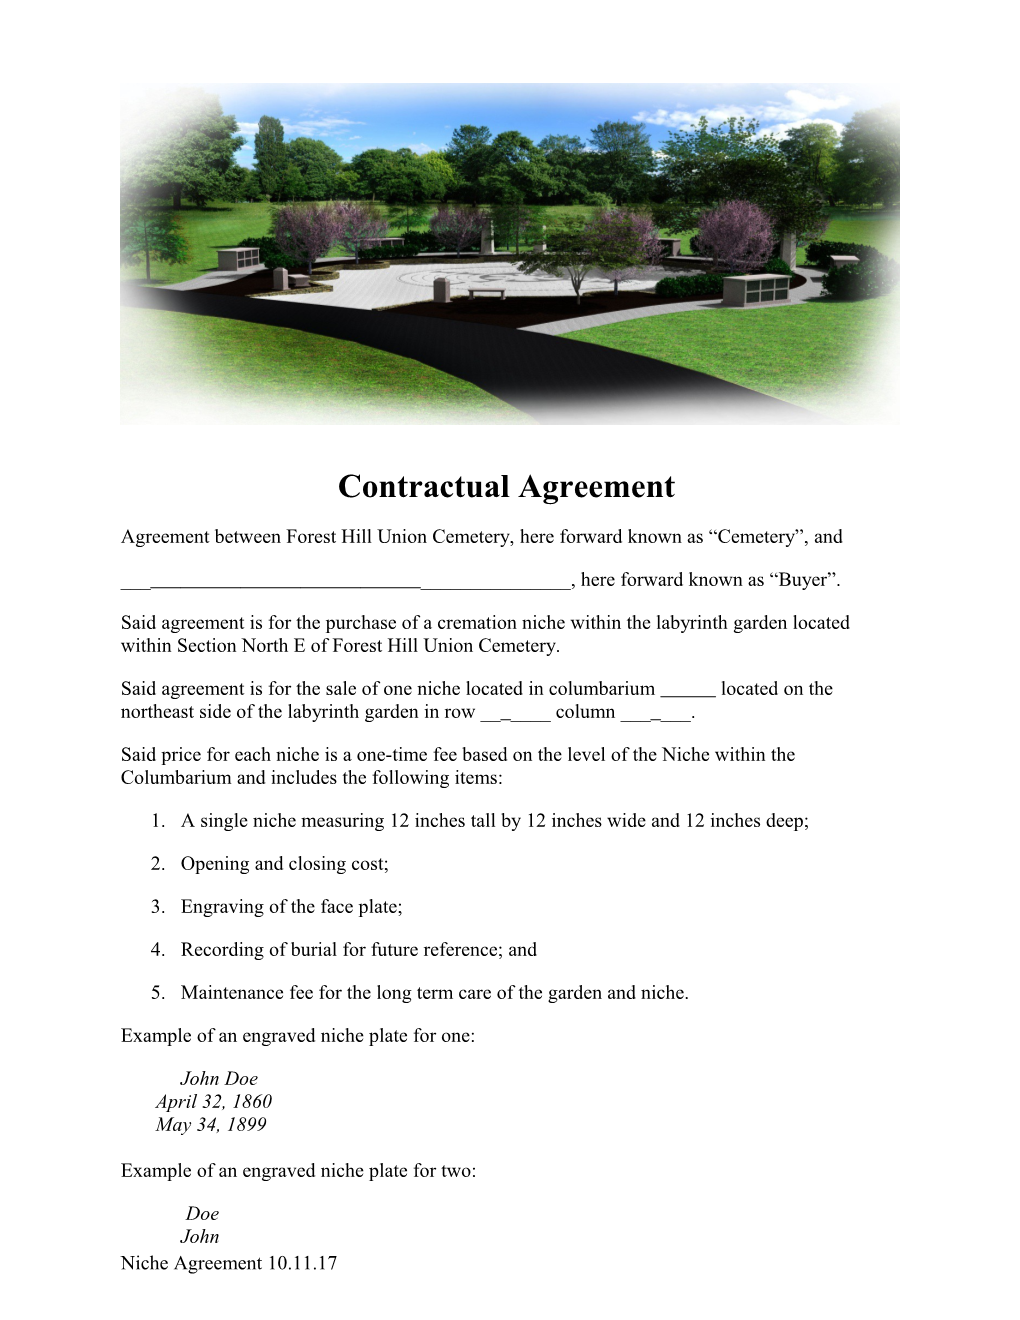 Contractual Agreement